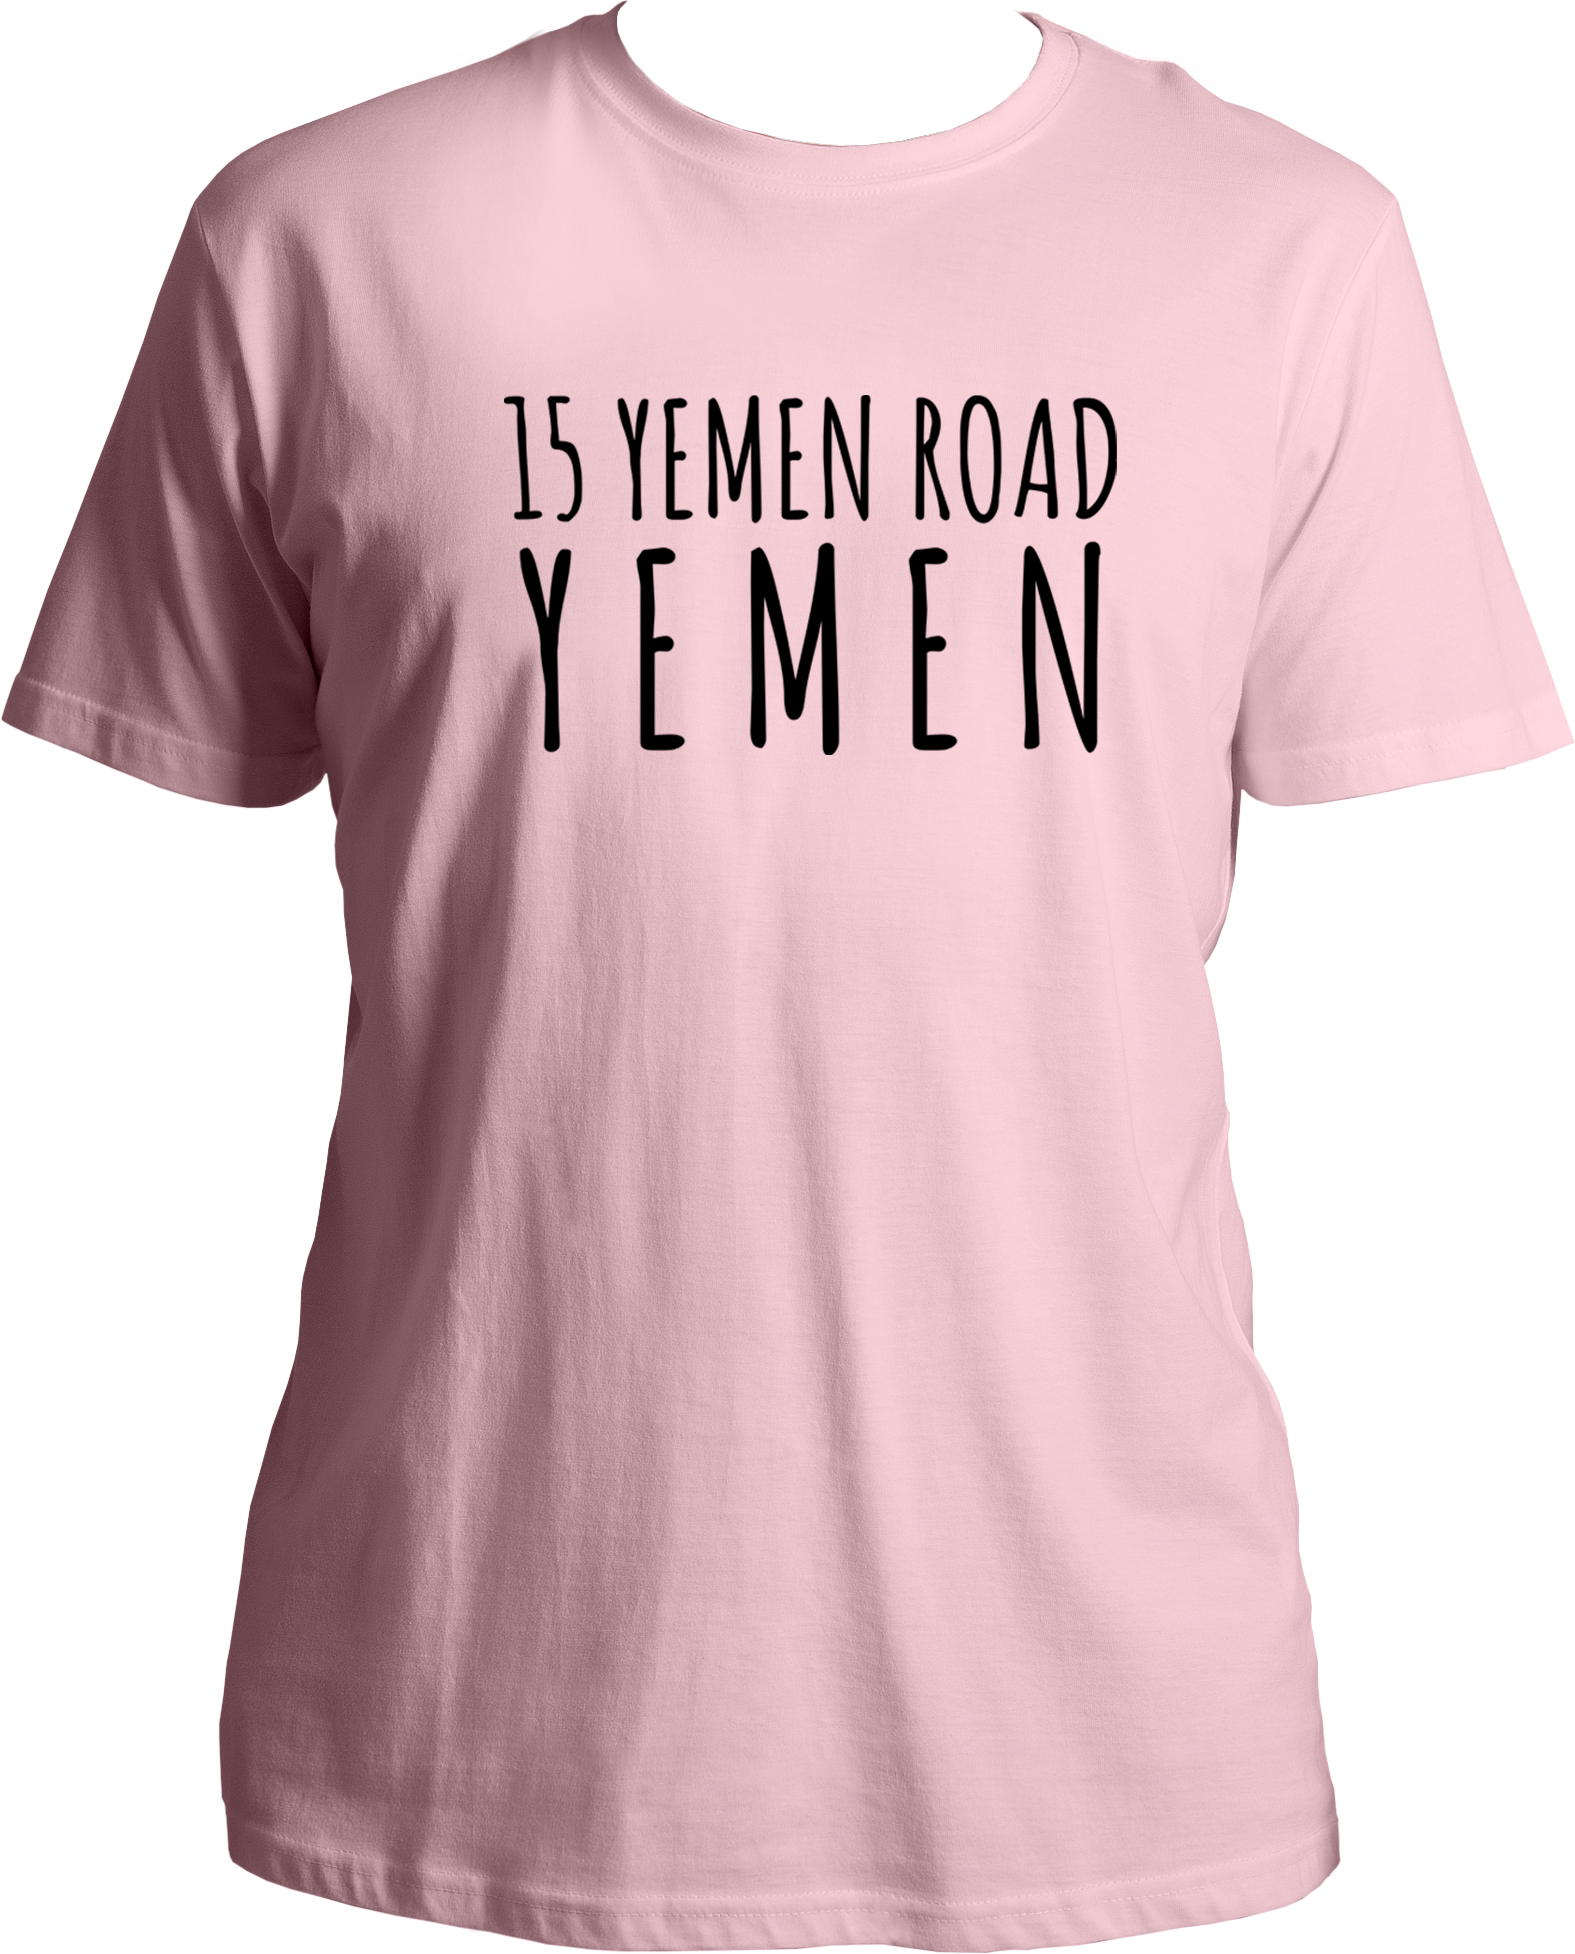 Welcome to our T-shirt haven, where nostalgia meets style! Introducing our Round Neck T-shirt under the TV Shows category, paying homage to the iconic sitcom, F.R.I.E.N.D.S. Get ready to relive the laughter with our "15 Yemen Road Yemen" tee, inspired by that hilarious Chandler moment that still has fans in stitches.